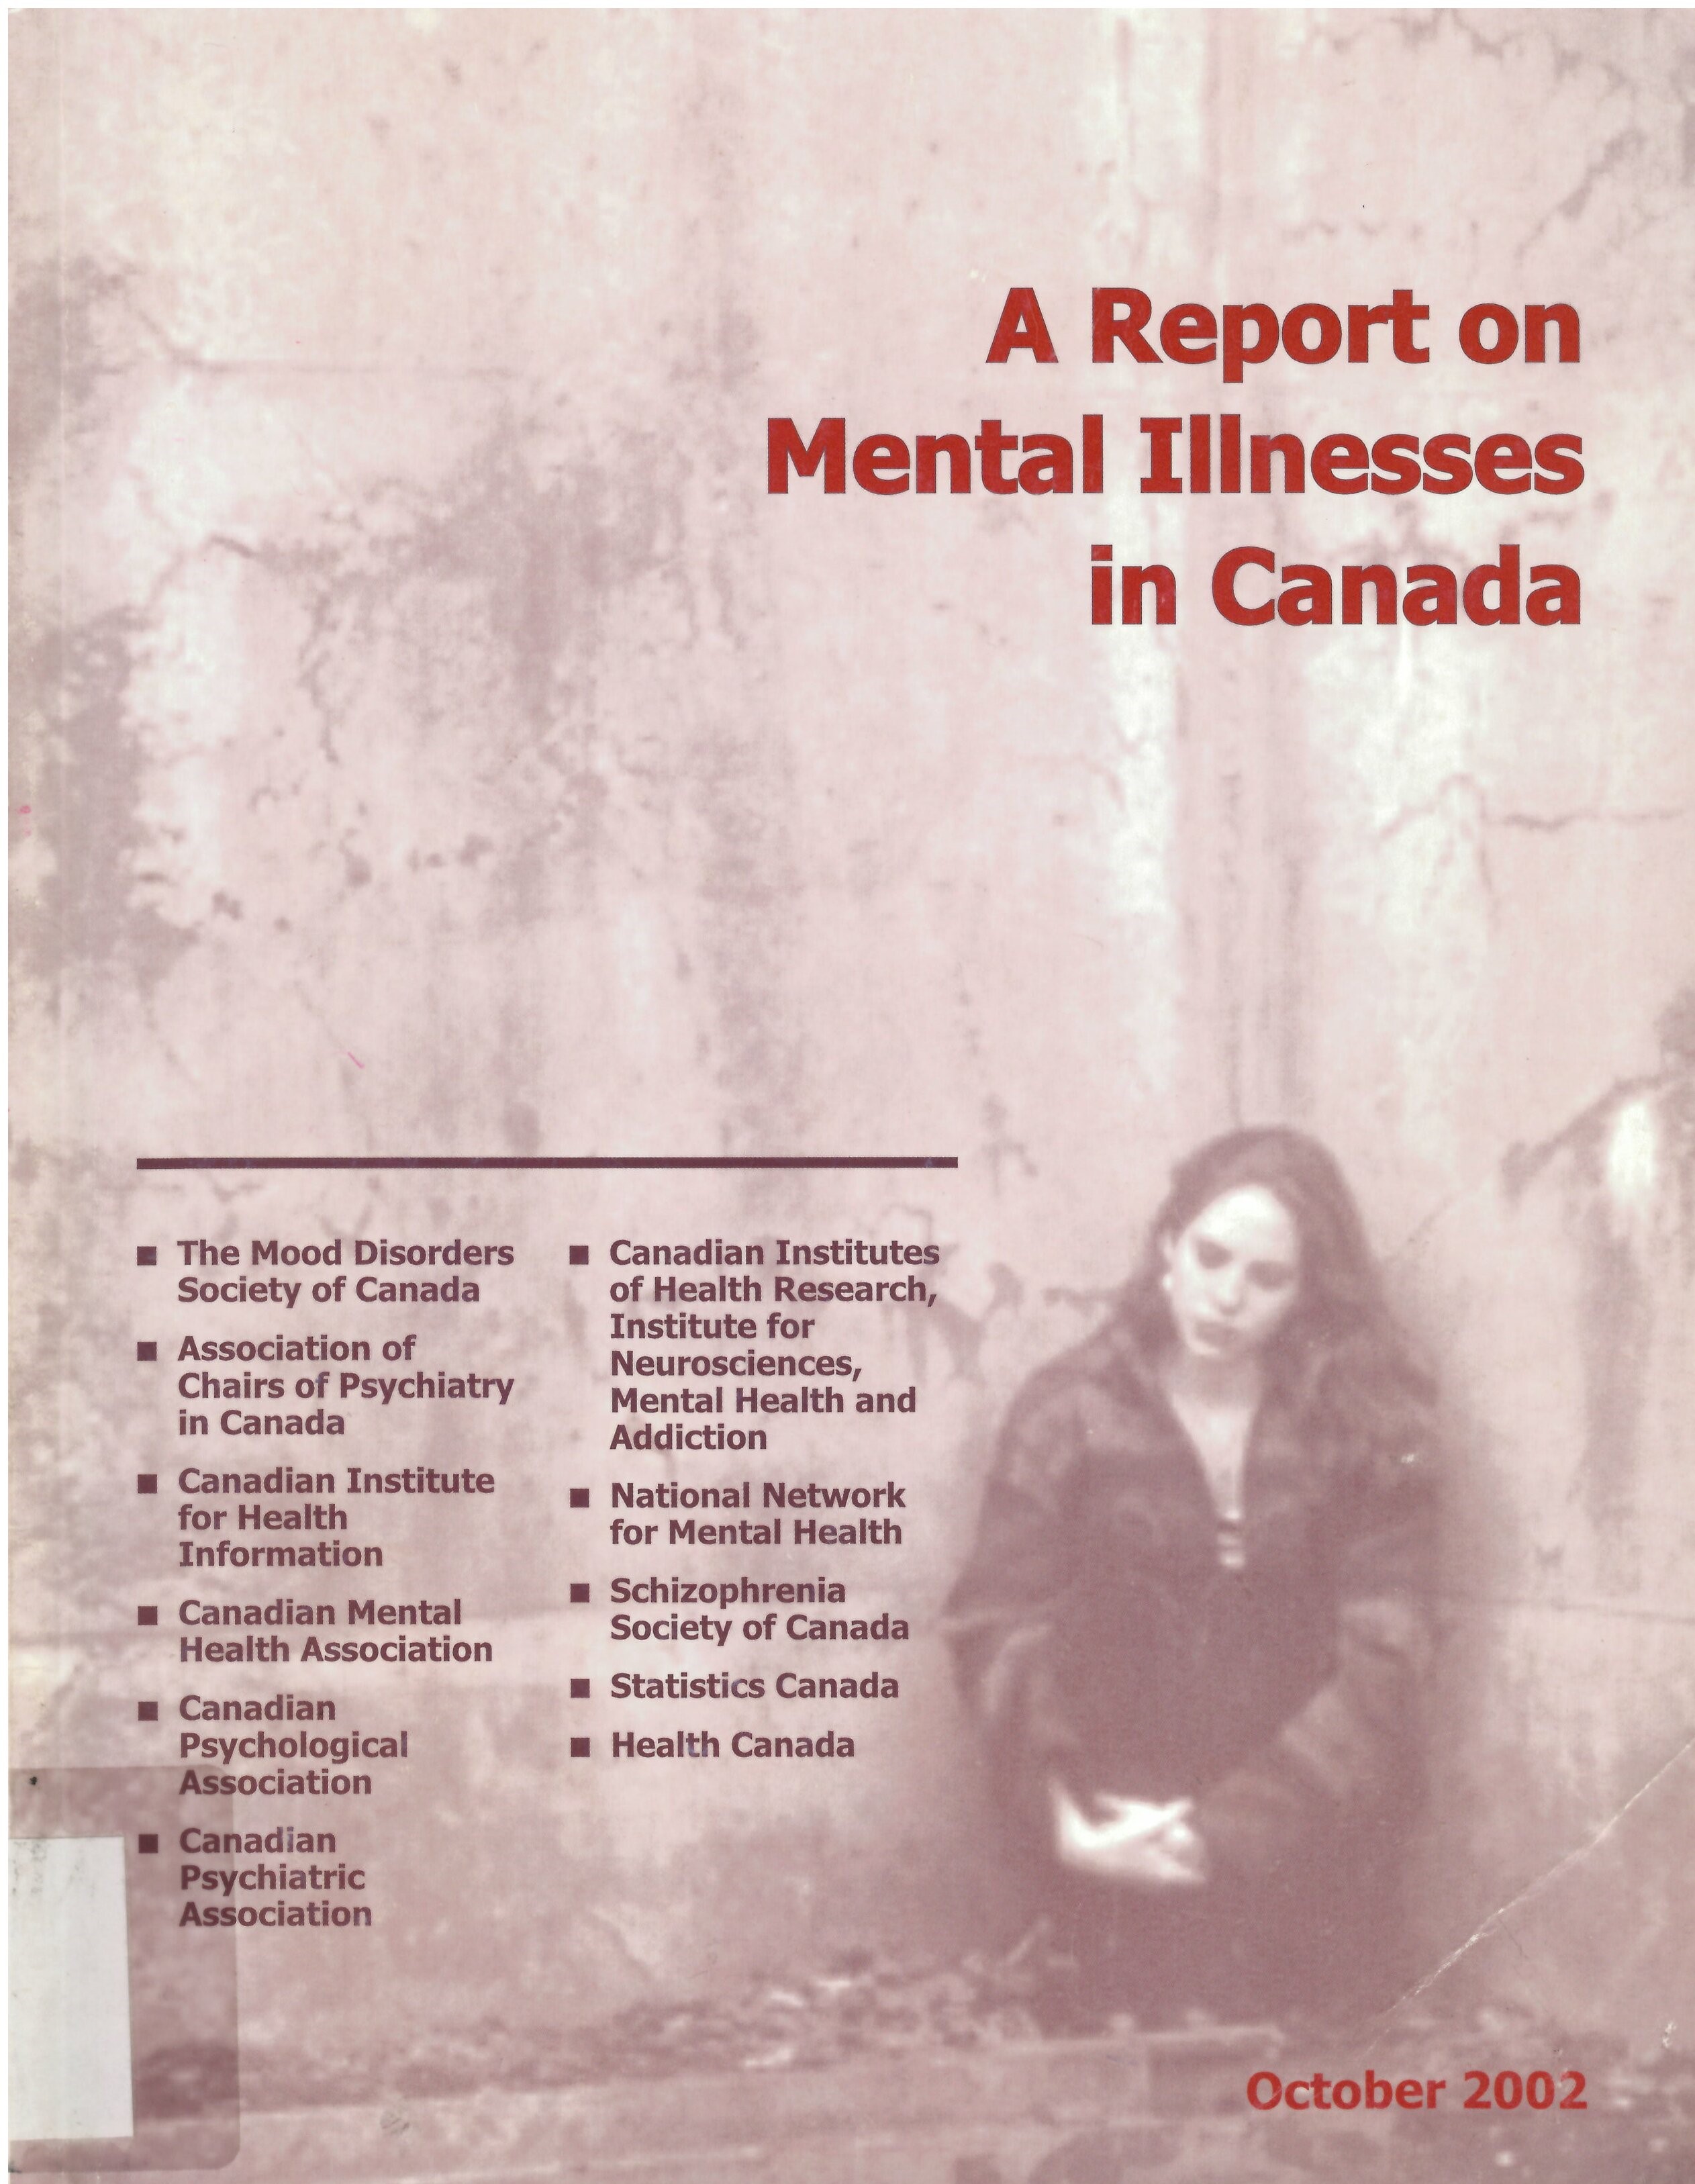 A report on mental illnesses in Canada